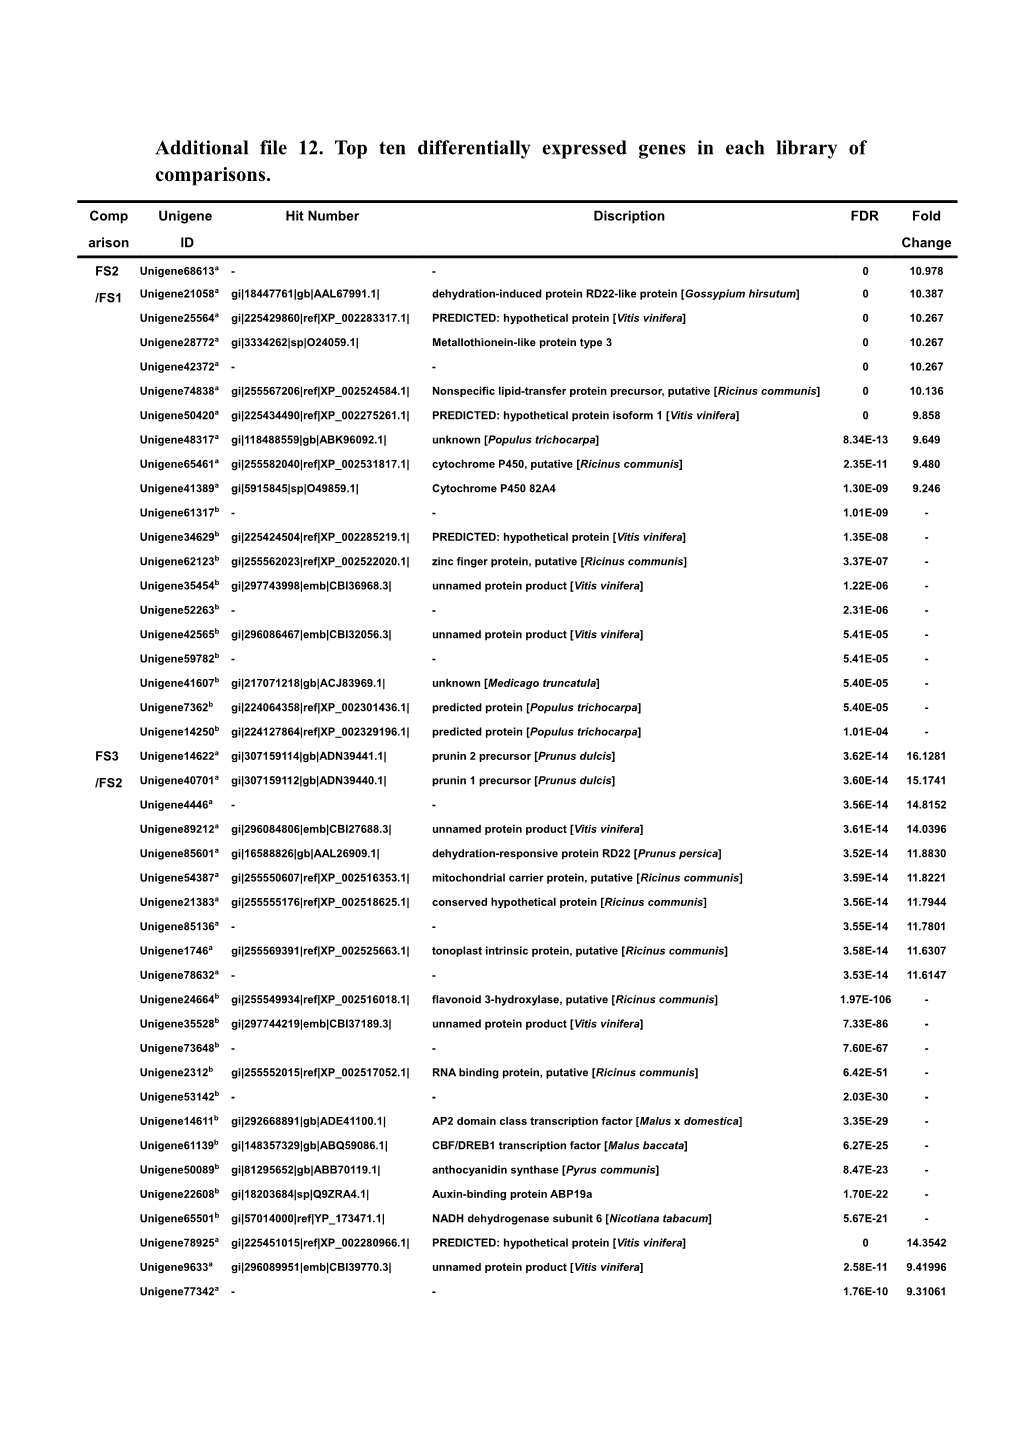 Table S3: Top Ten Differentially Expressed Genes in Each Library of Comparisons